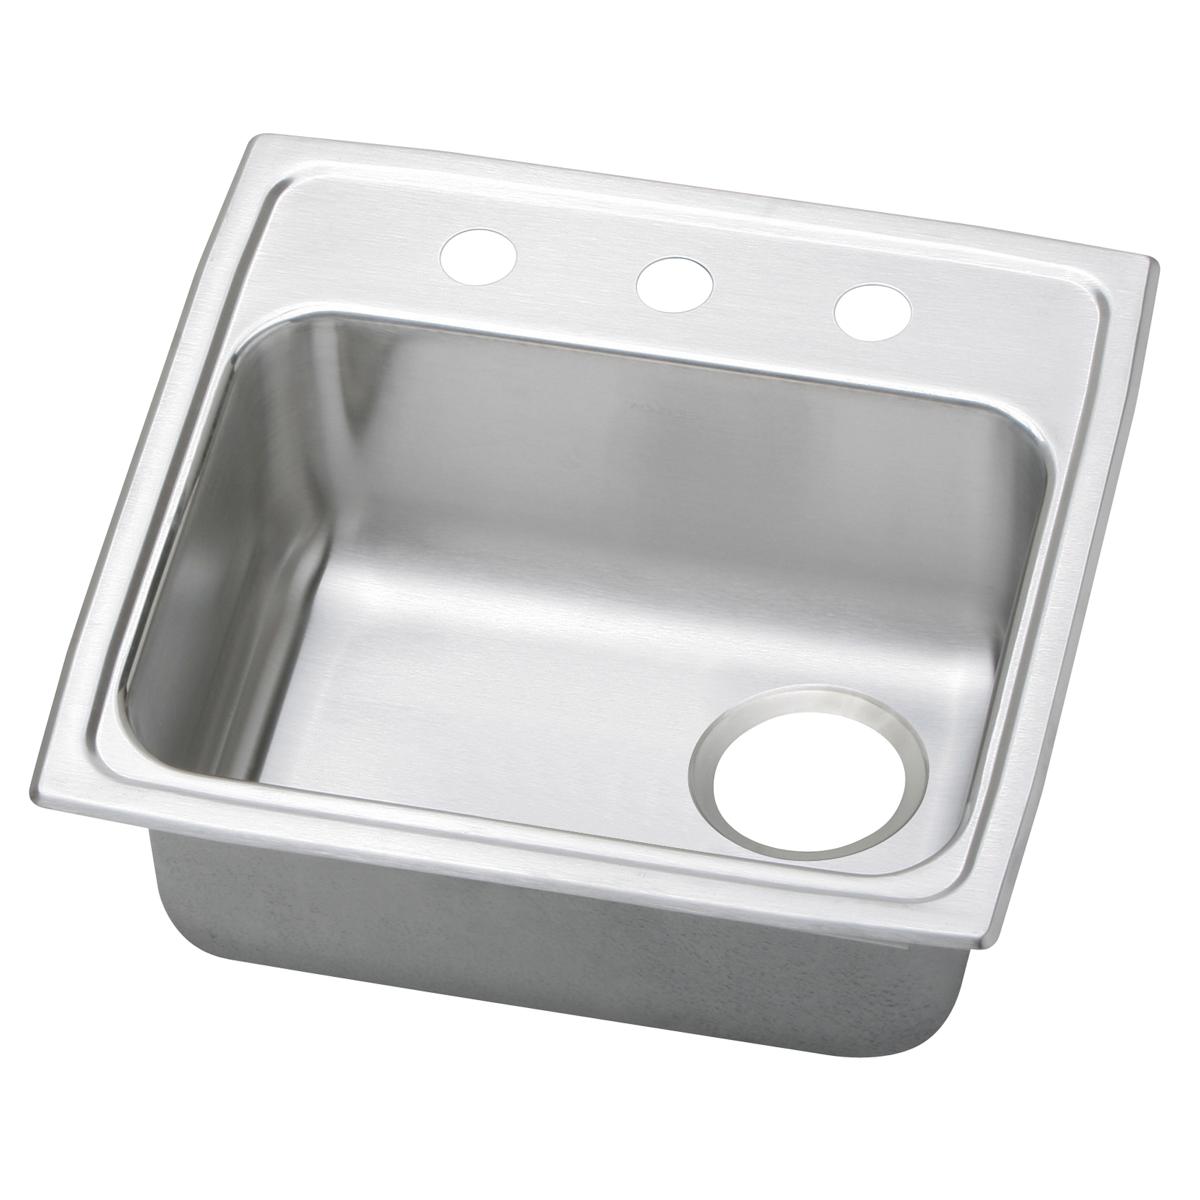 Elkay Celebrity 19-1/2" x 19" x 5-1/2" Single Bowl Drop-in ADA Sink with Quick-clip and Right Drain